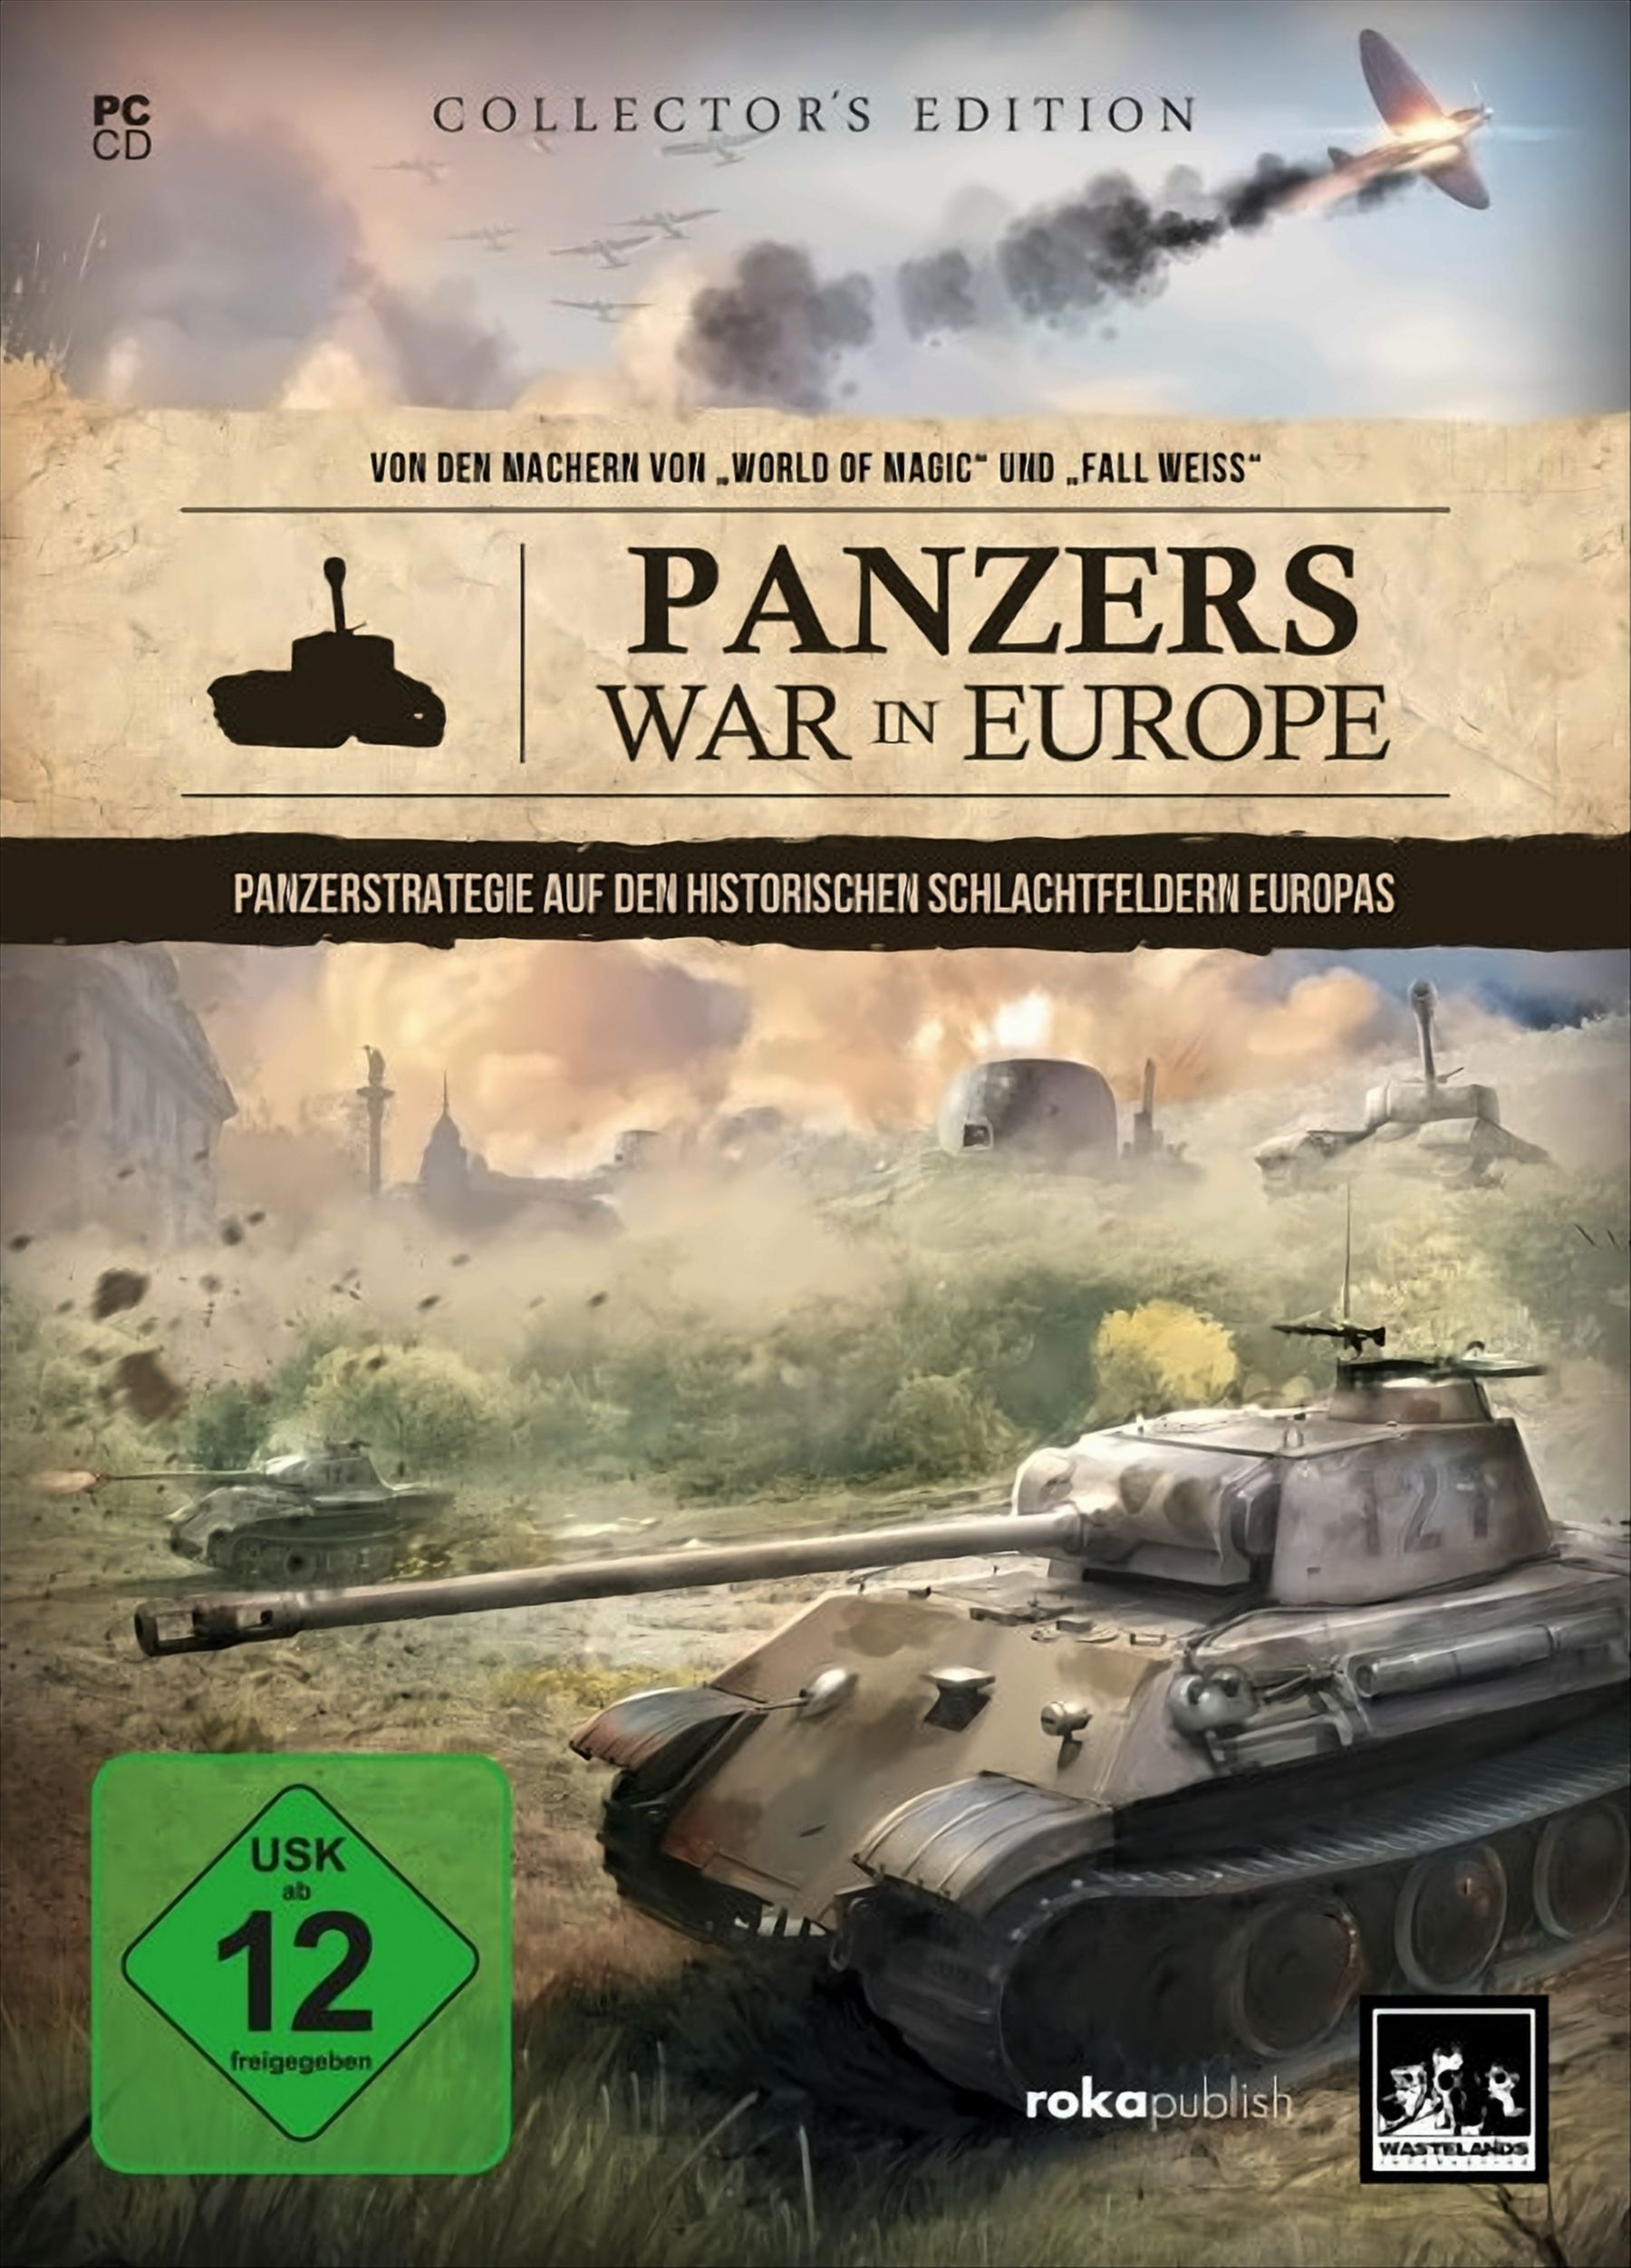 - Panzers (Collector\'s [PC] Edition) in Europe War -